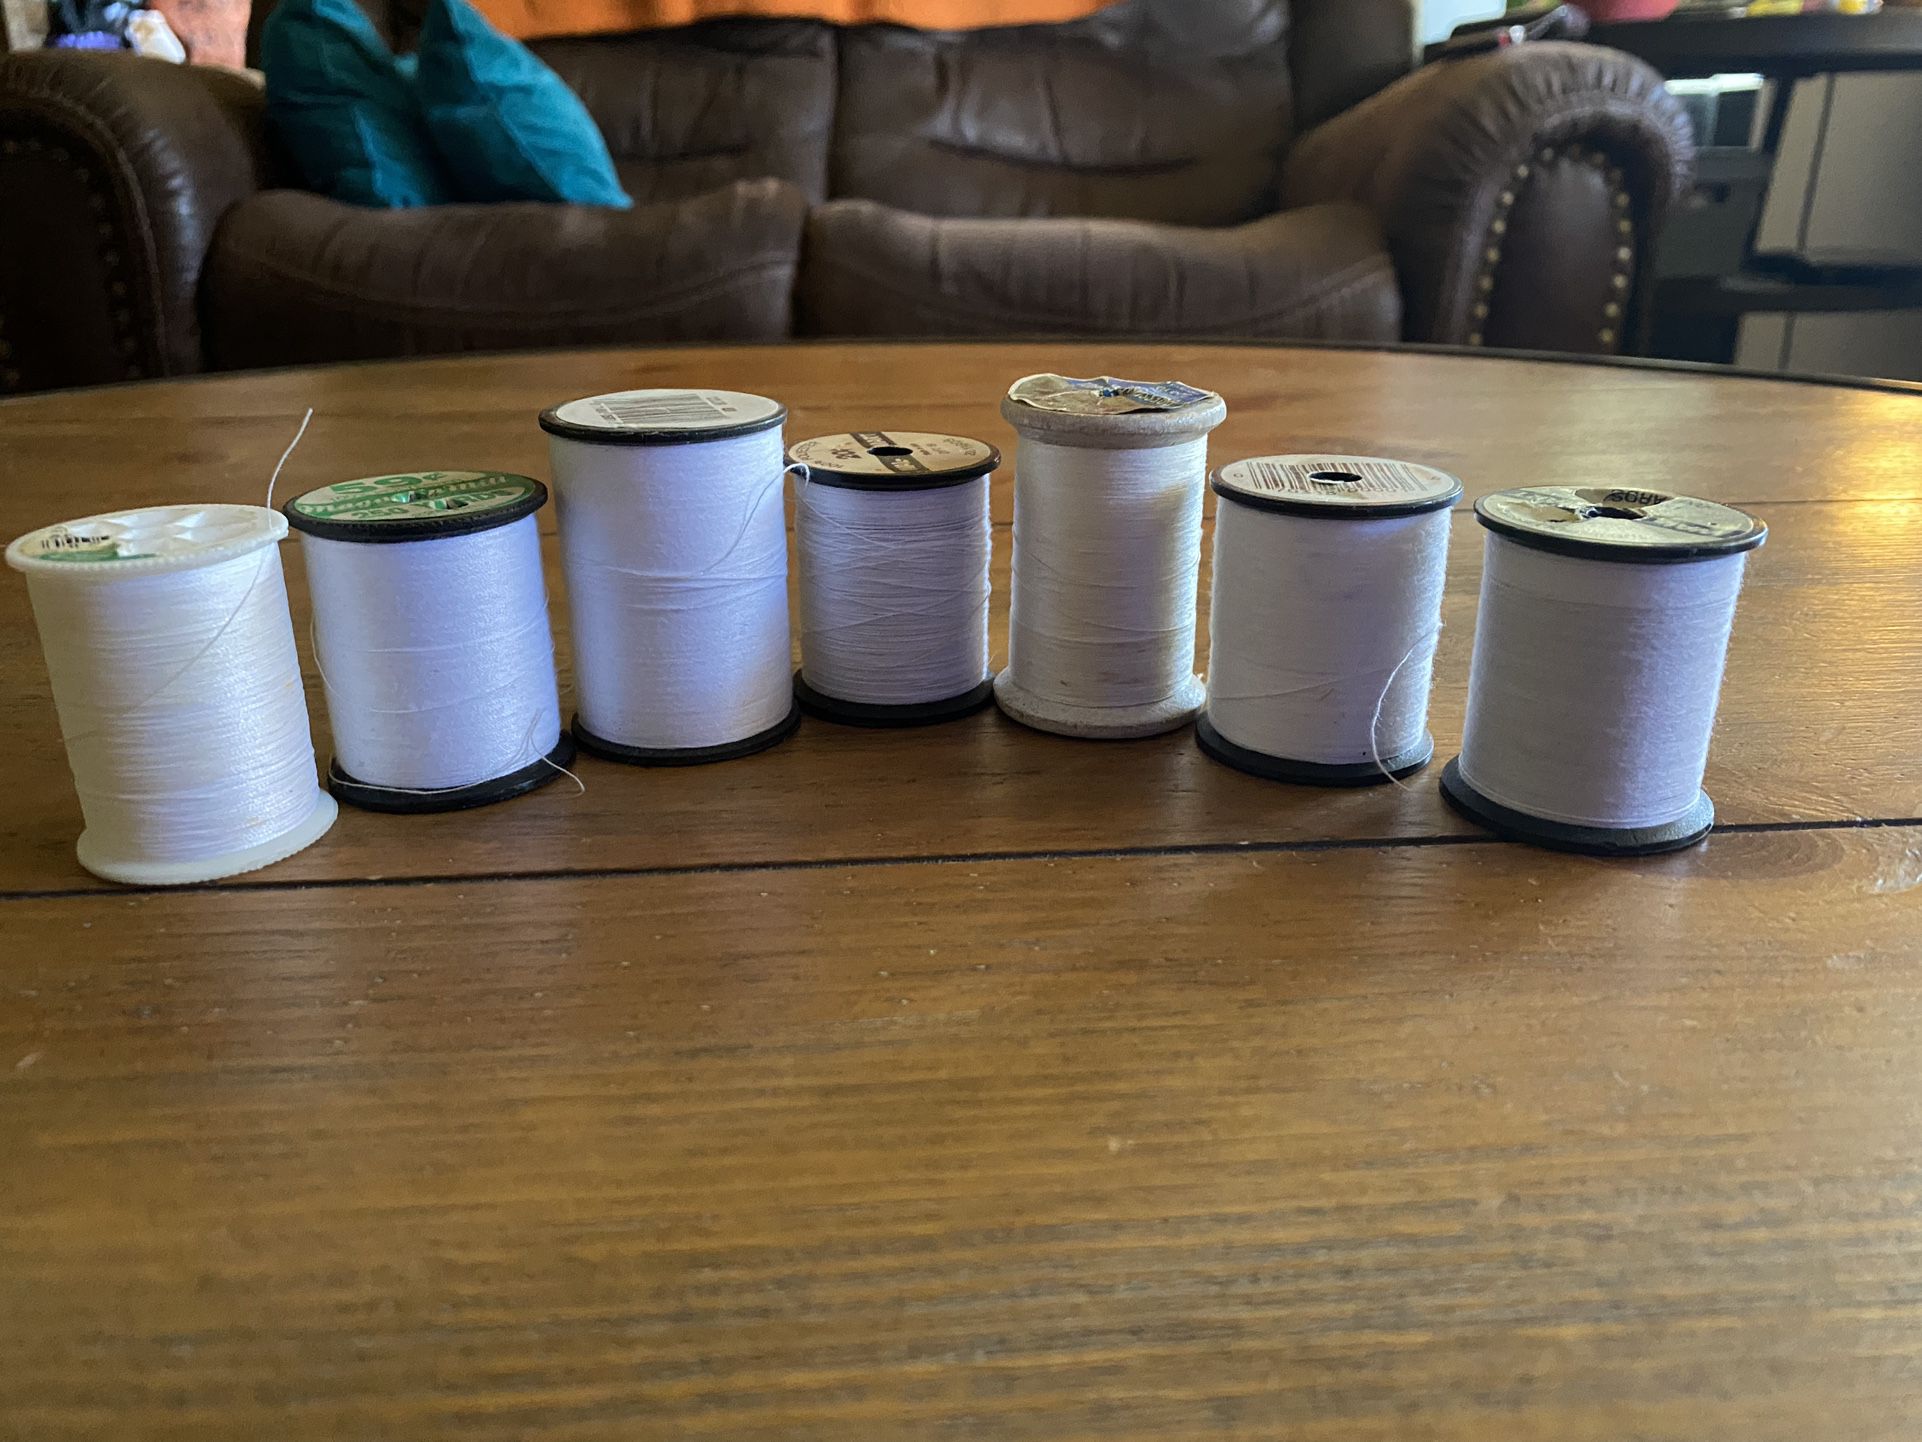 Sewing thread-over 30 spools